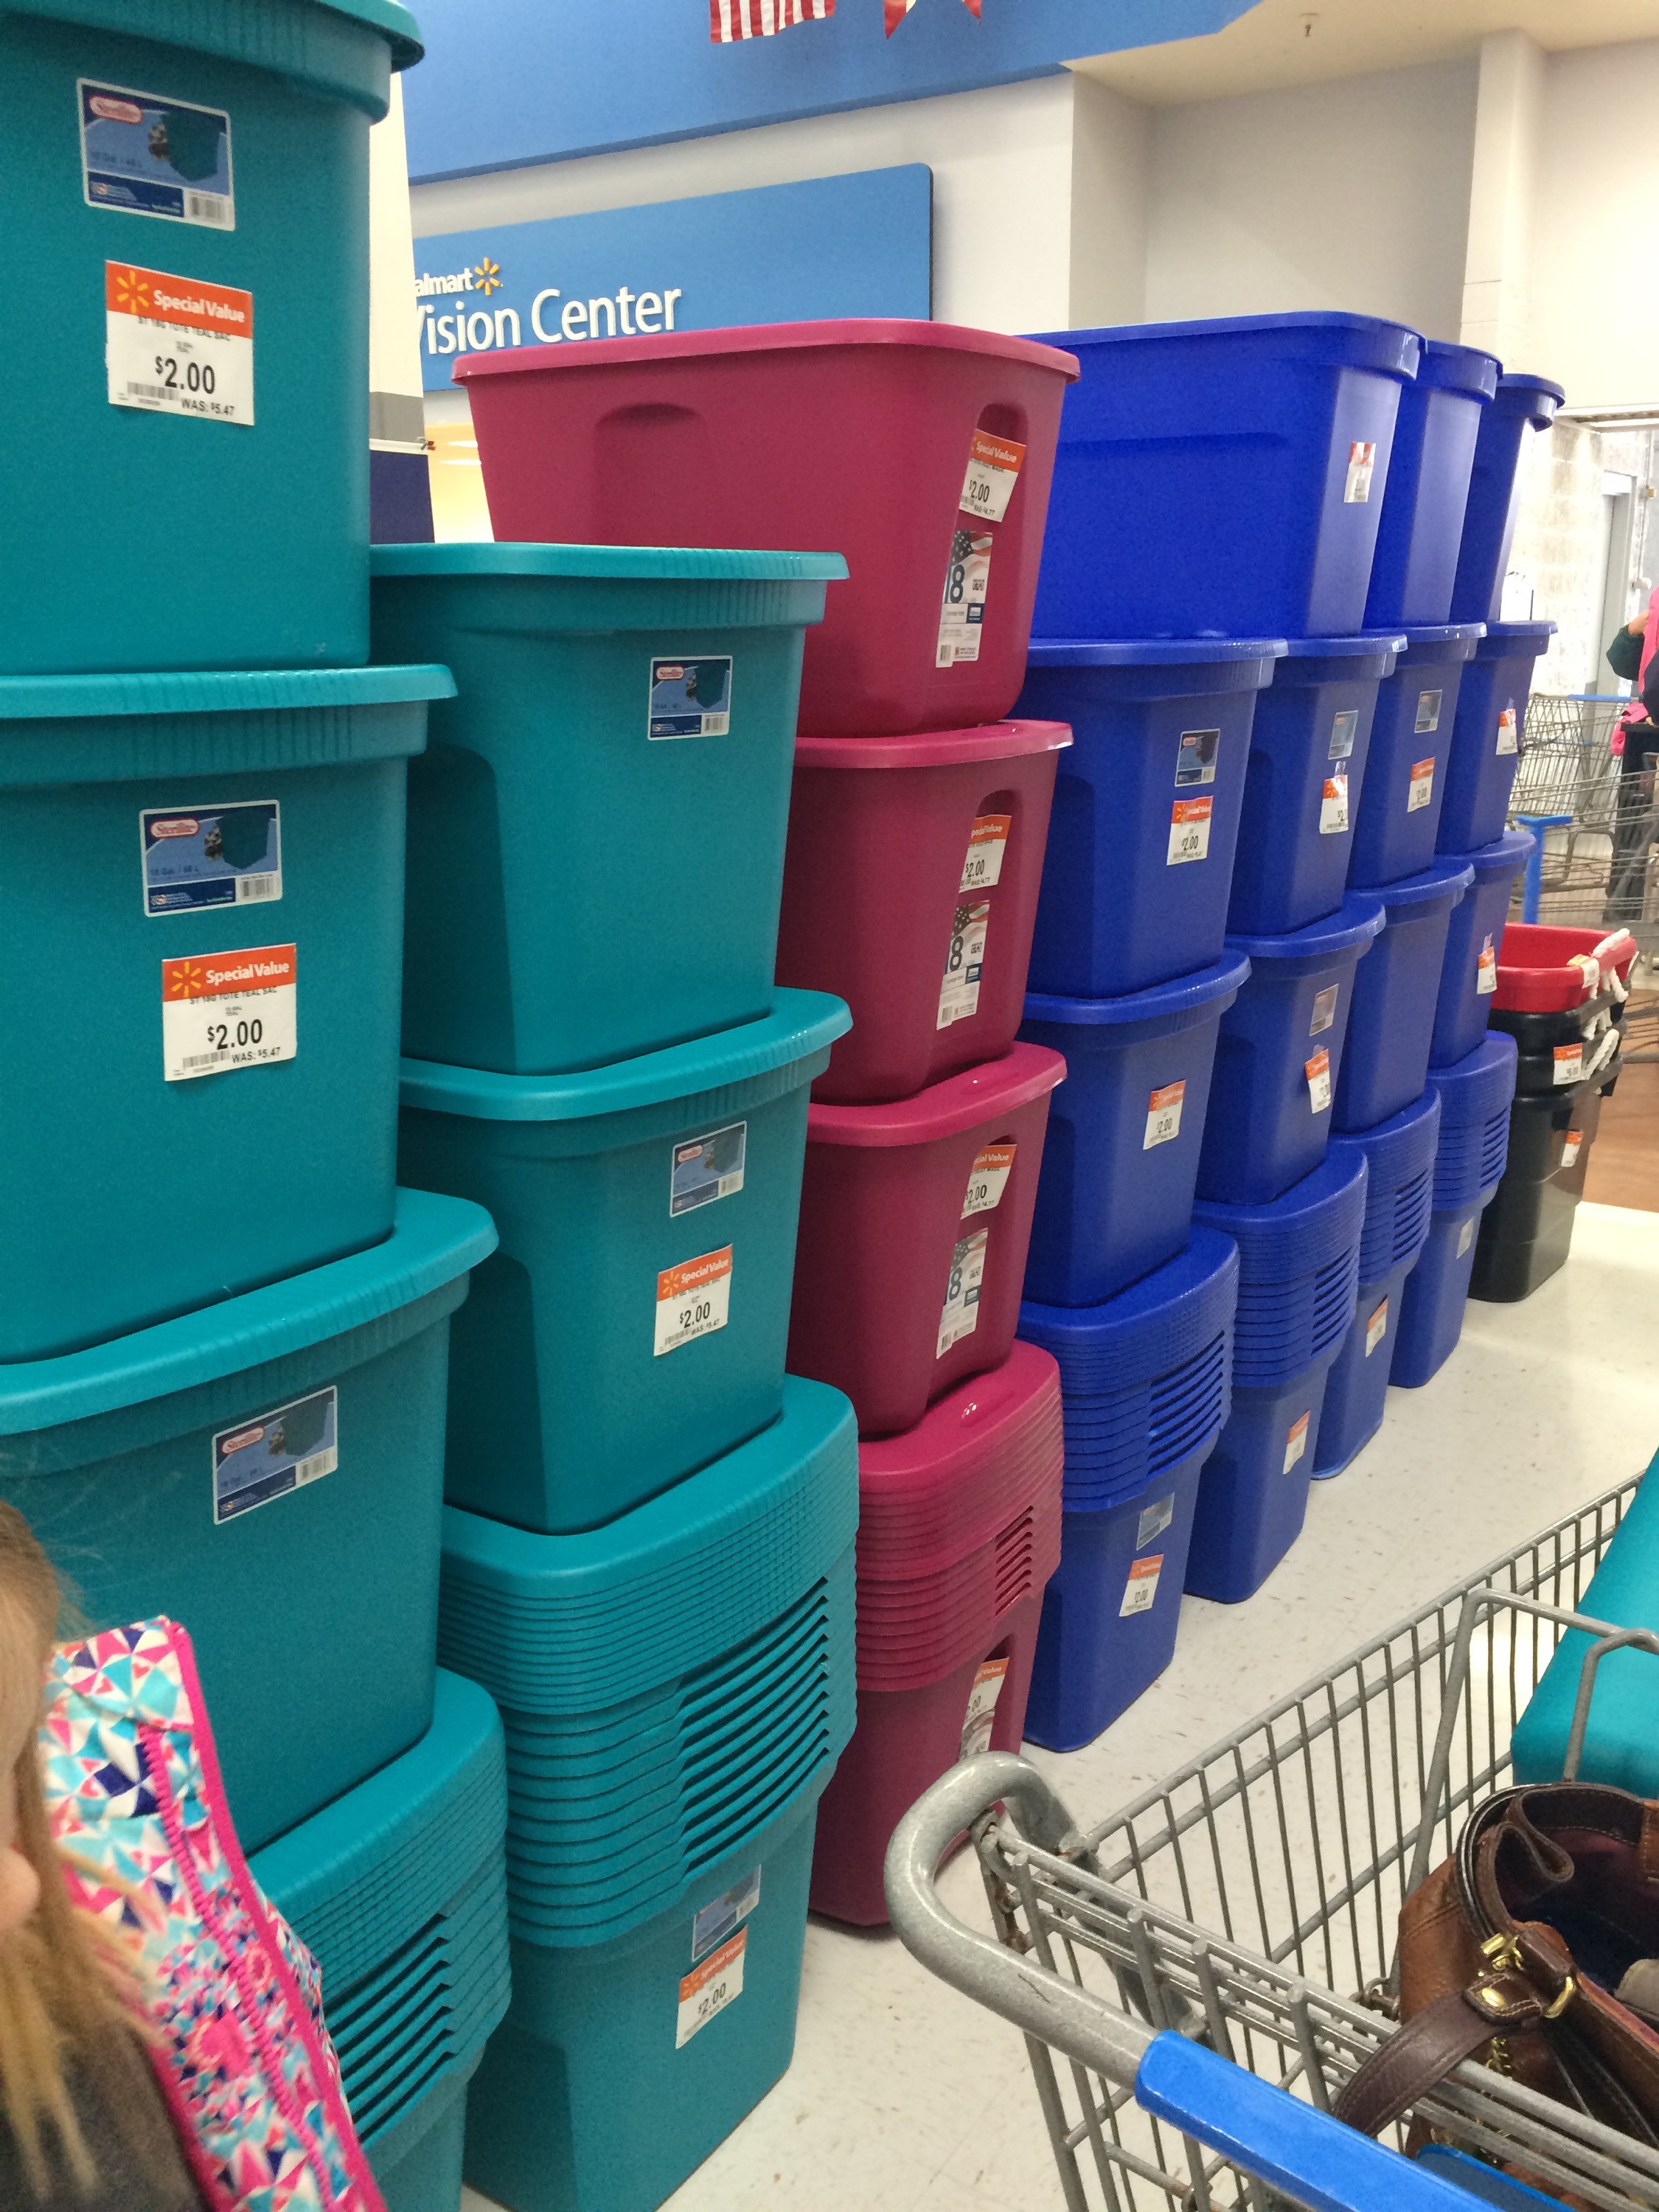 Christmas Storage Totes
 f Walmart Christmas Clearance Includes $2 Storage